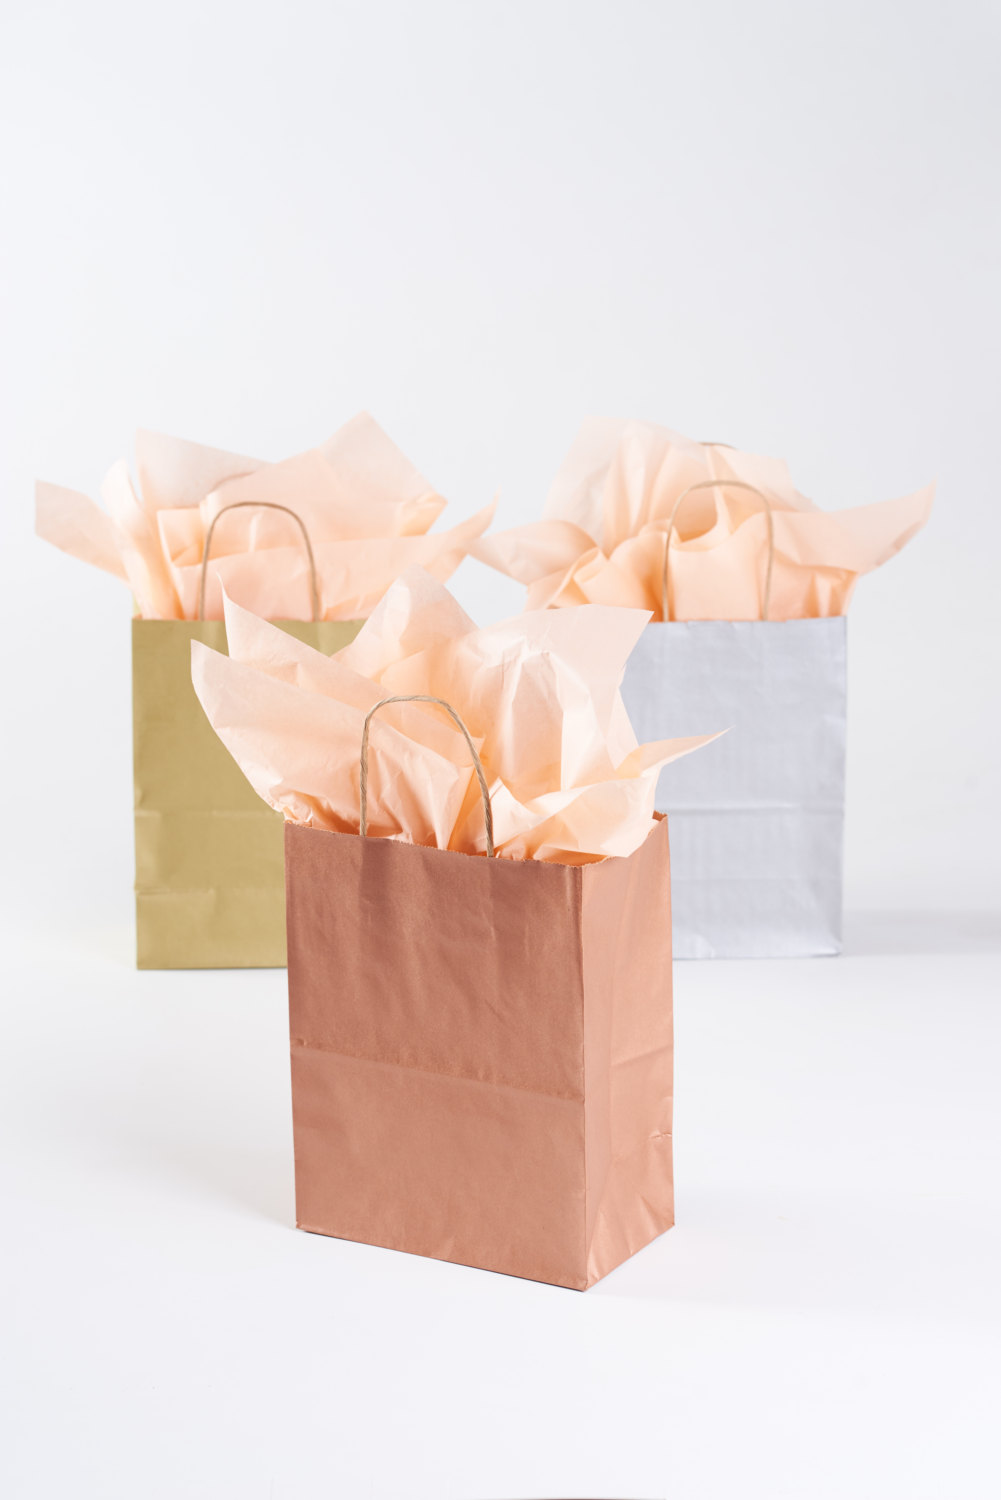 Wedding Welcome Bags Do's and Don'ts